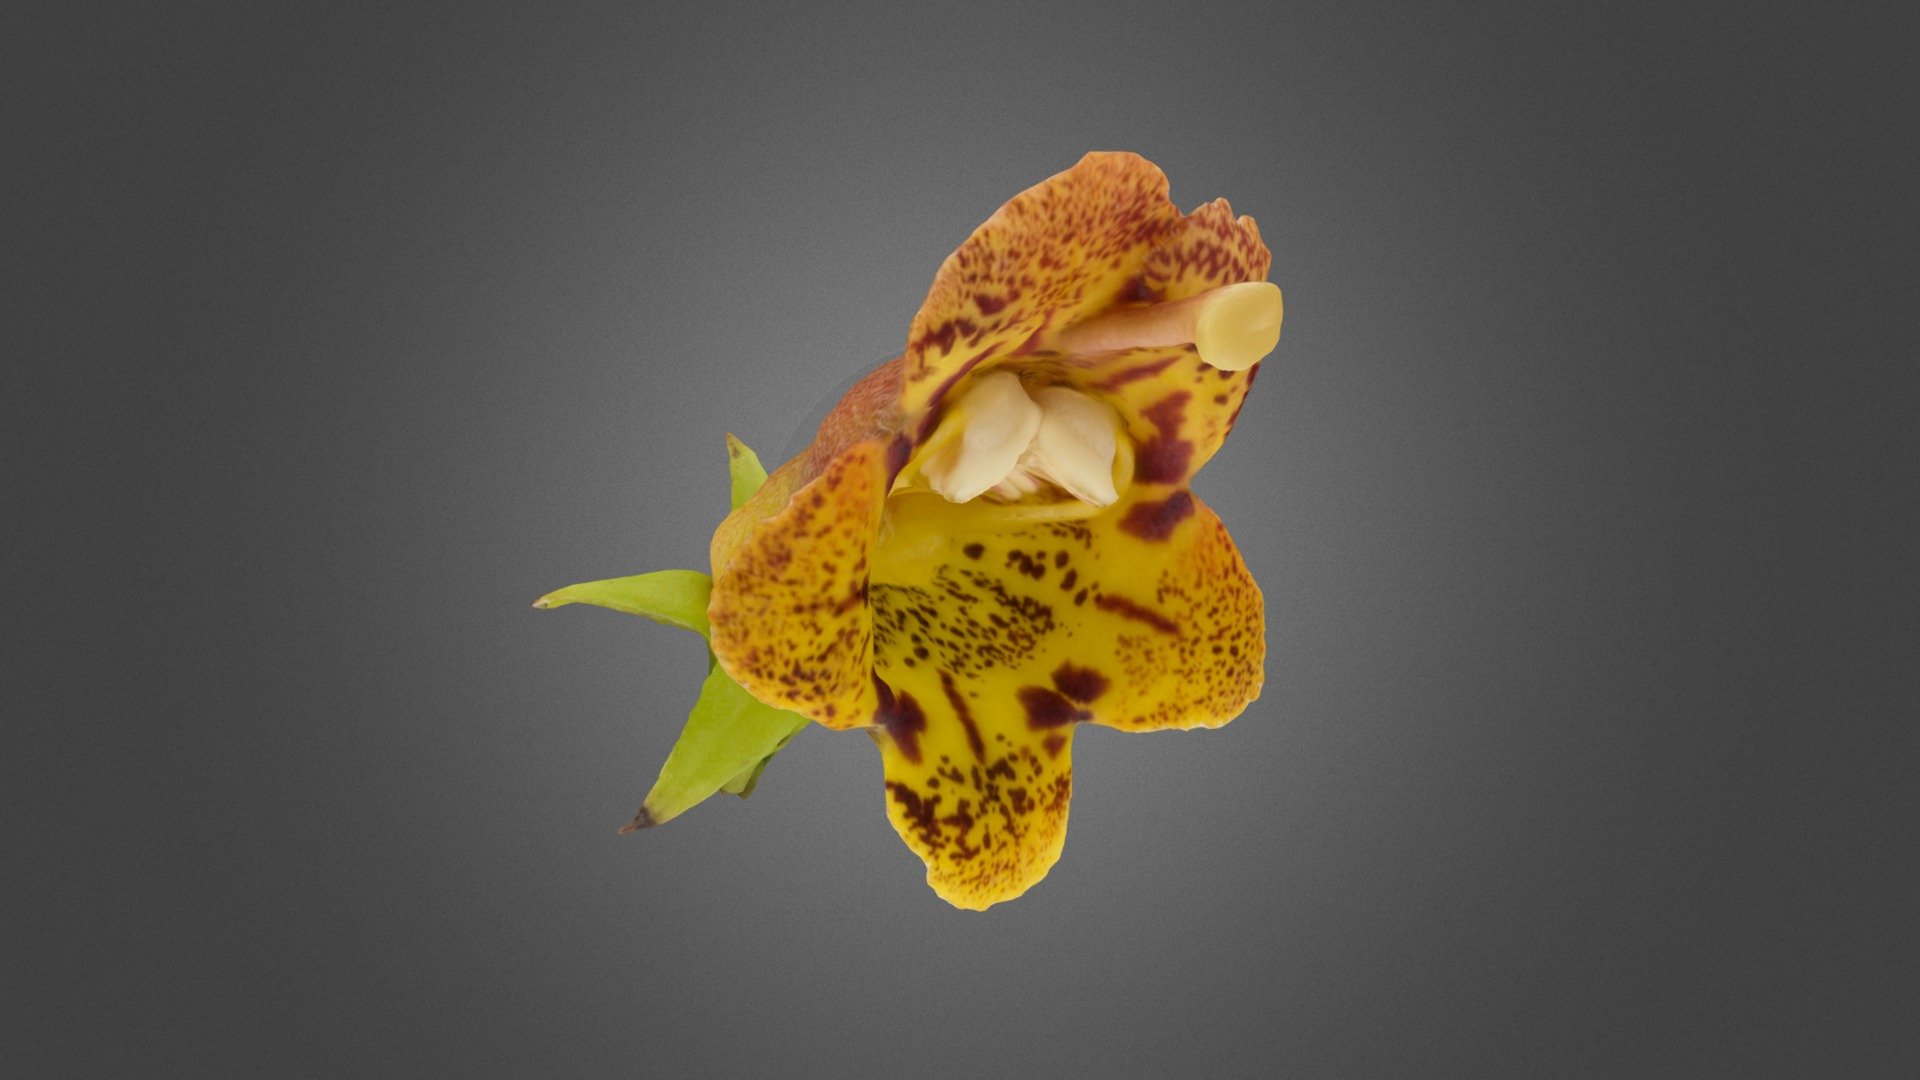 Flower of a hybrid between Rhytidophyllum auriculatum and Rhytidophyllum vernicosum. Specimen from the collection of the Montreal Botanical Garden (accession 103-2013). Model obtained by photogrammetry with Agisoft Metashape 3d model